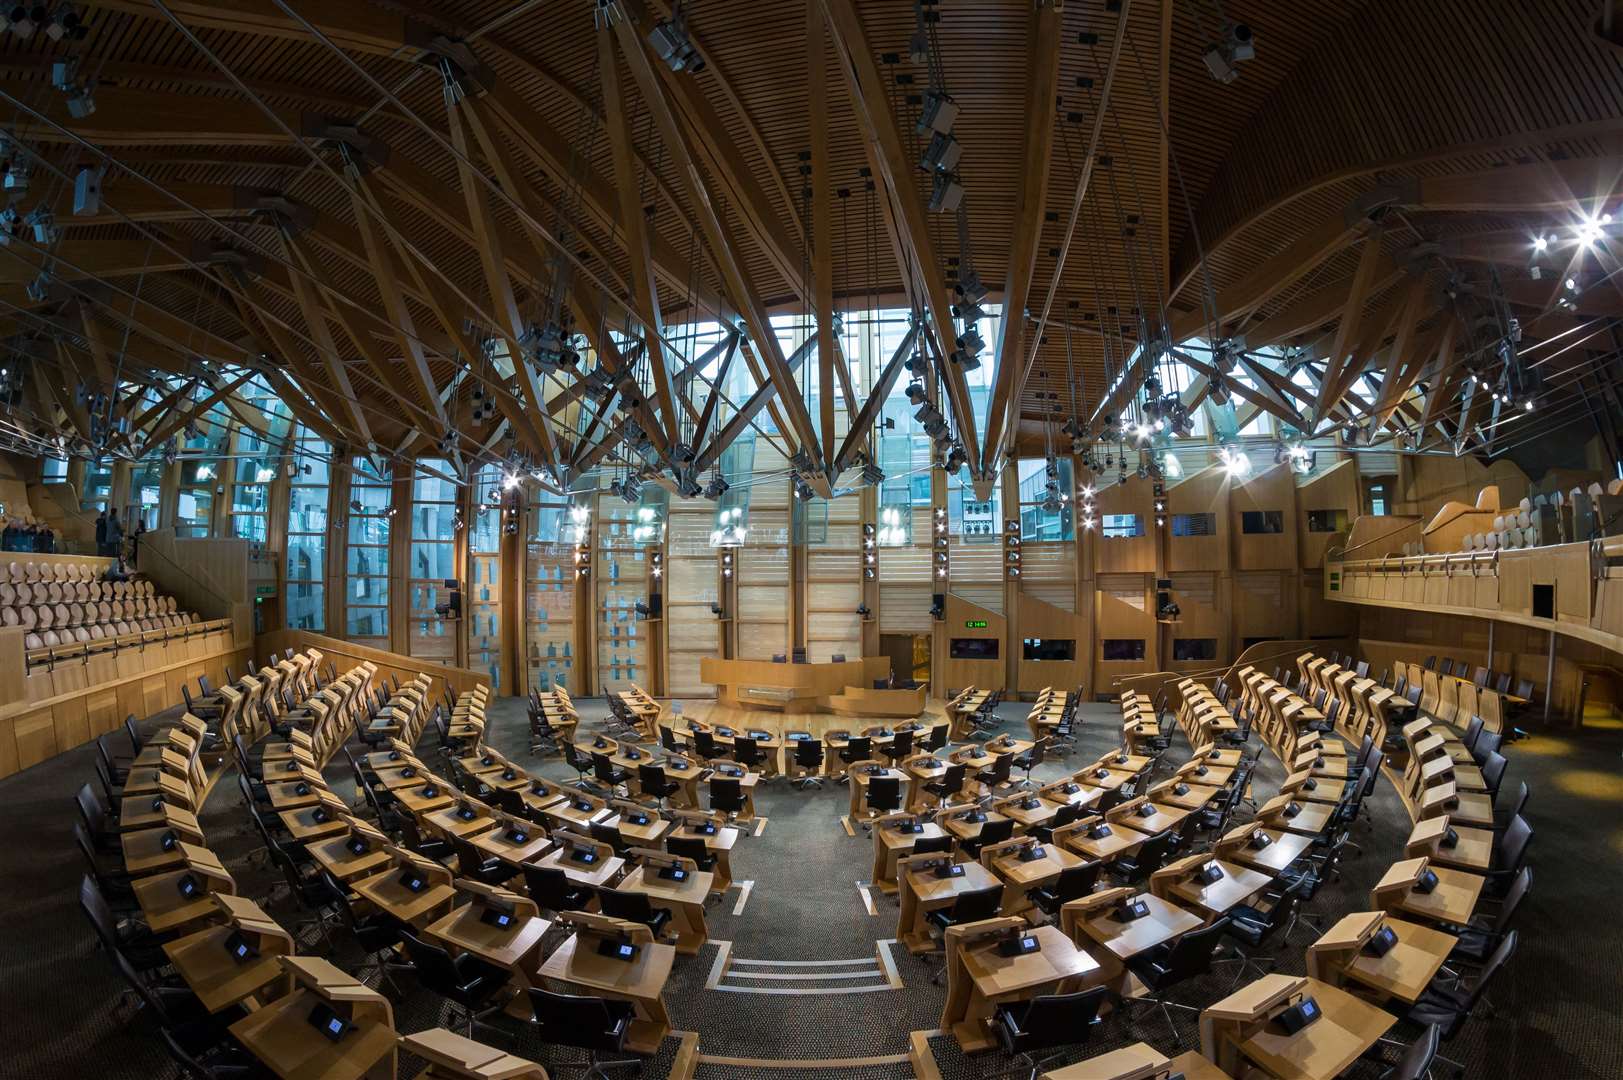 A debate at Holyrood in scheduled for Thursday